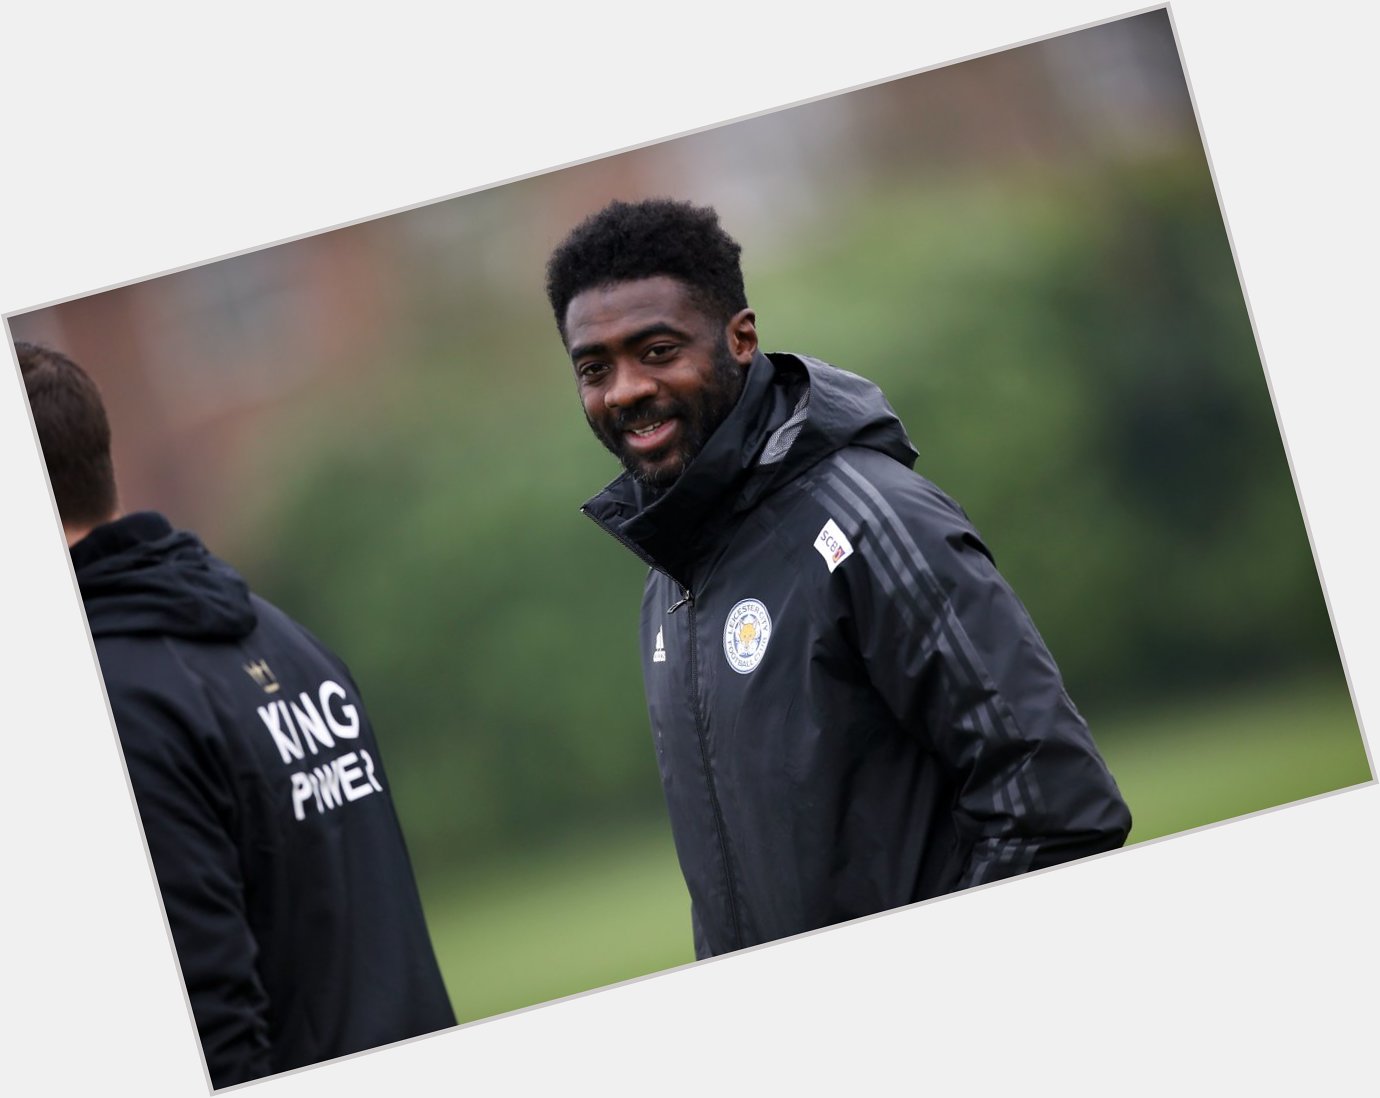 Happy 3  8  th birthday to first-team coach Kolo Toure!

Have a great day, Kolo! 